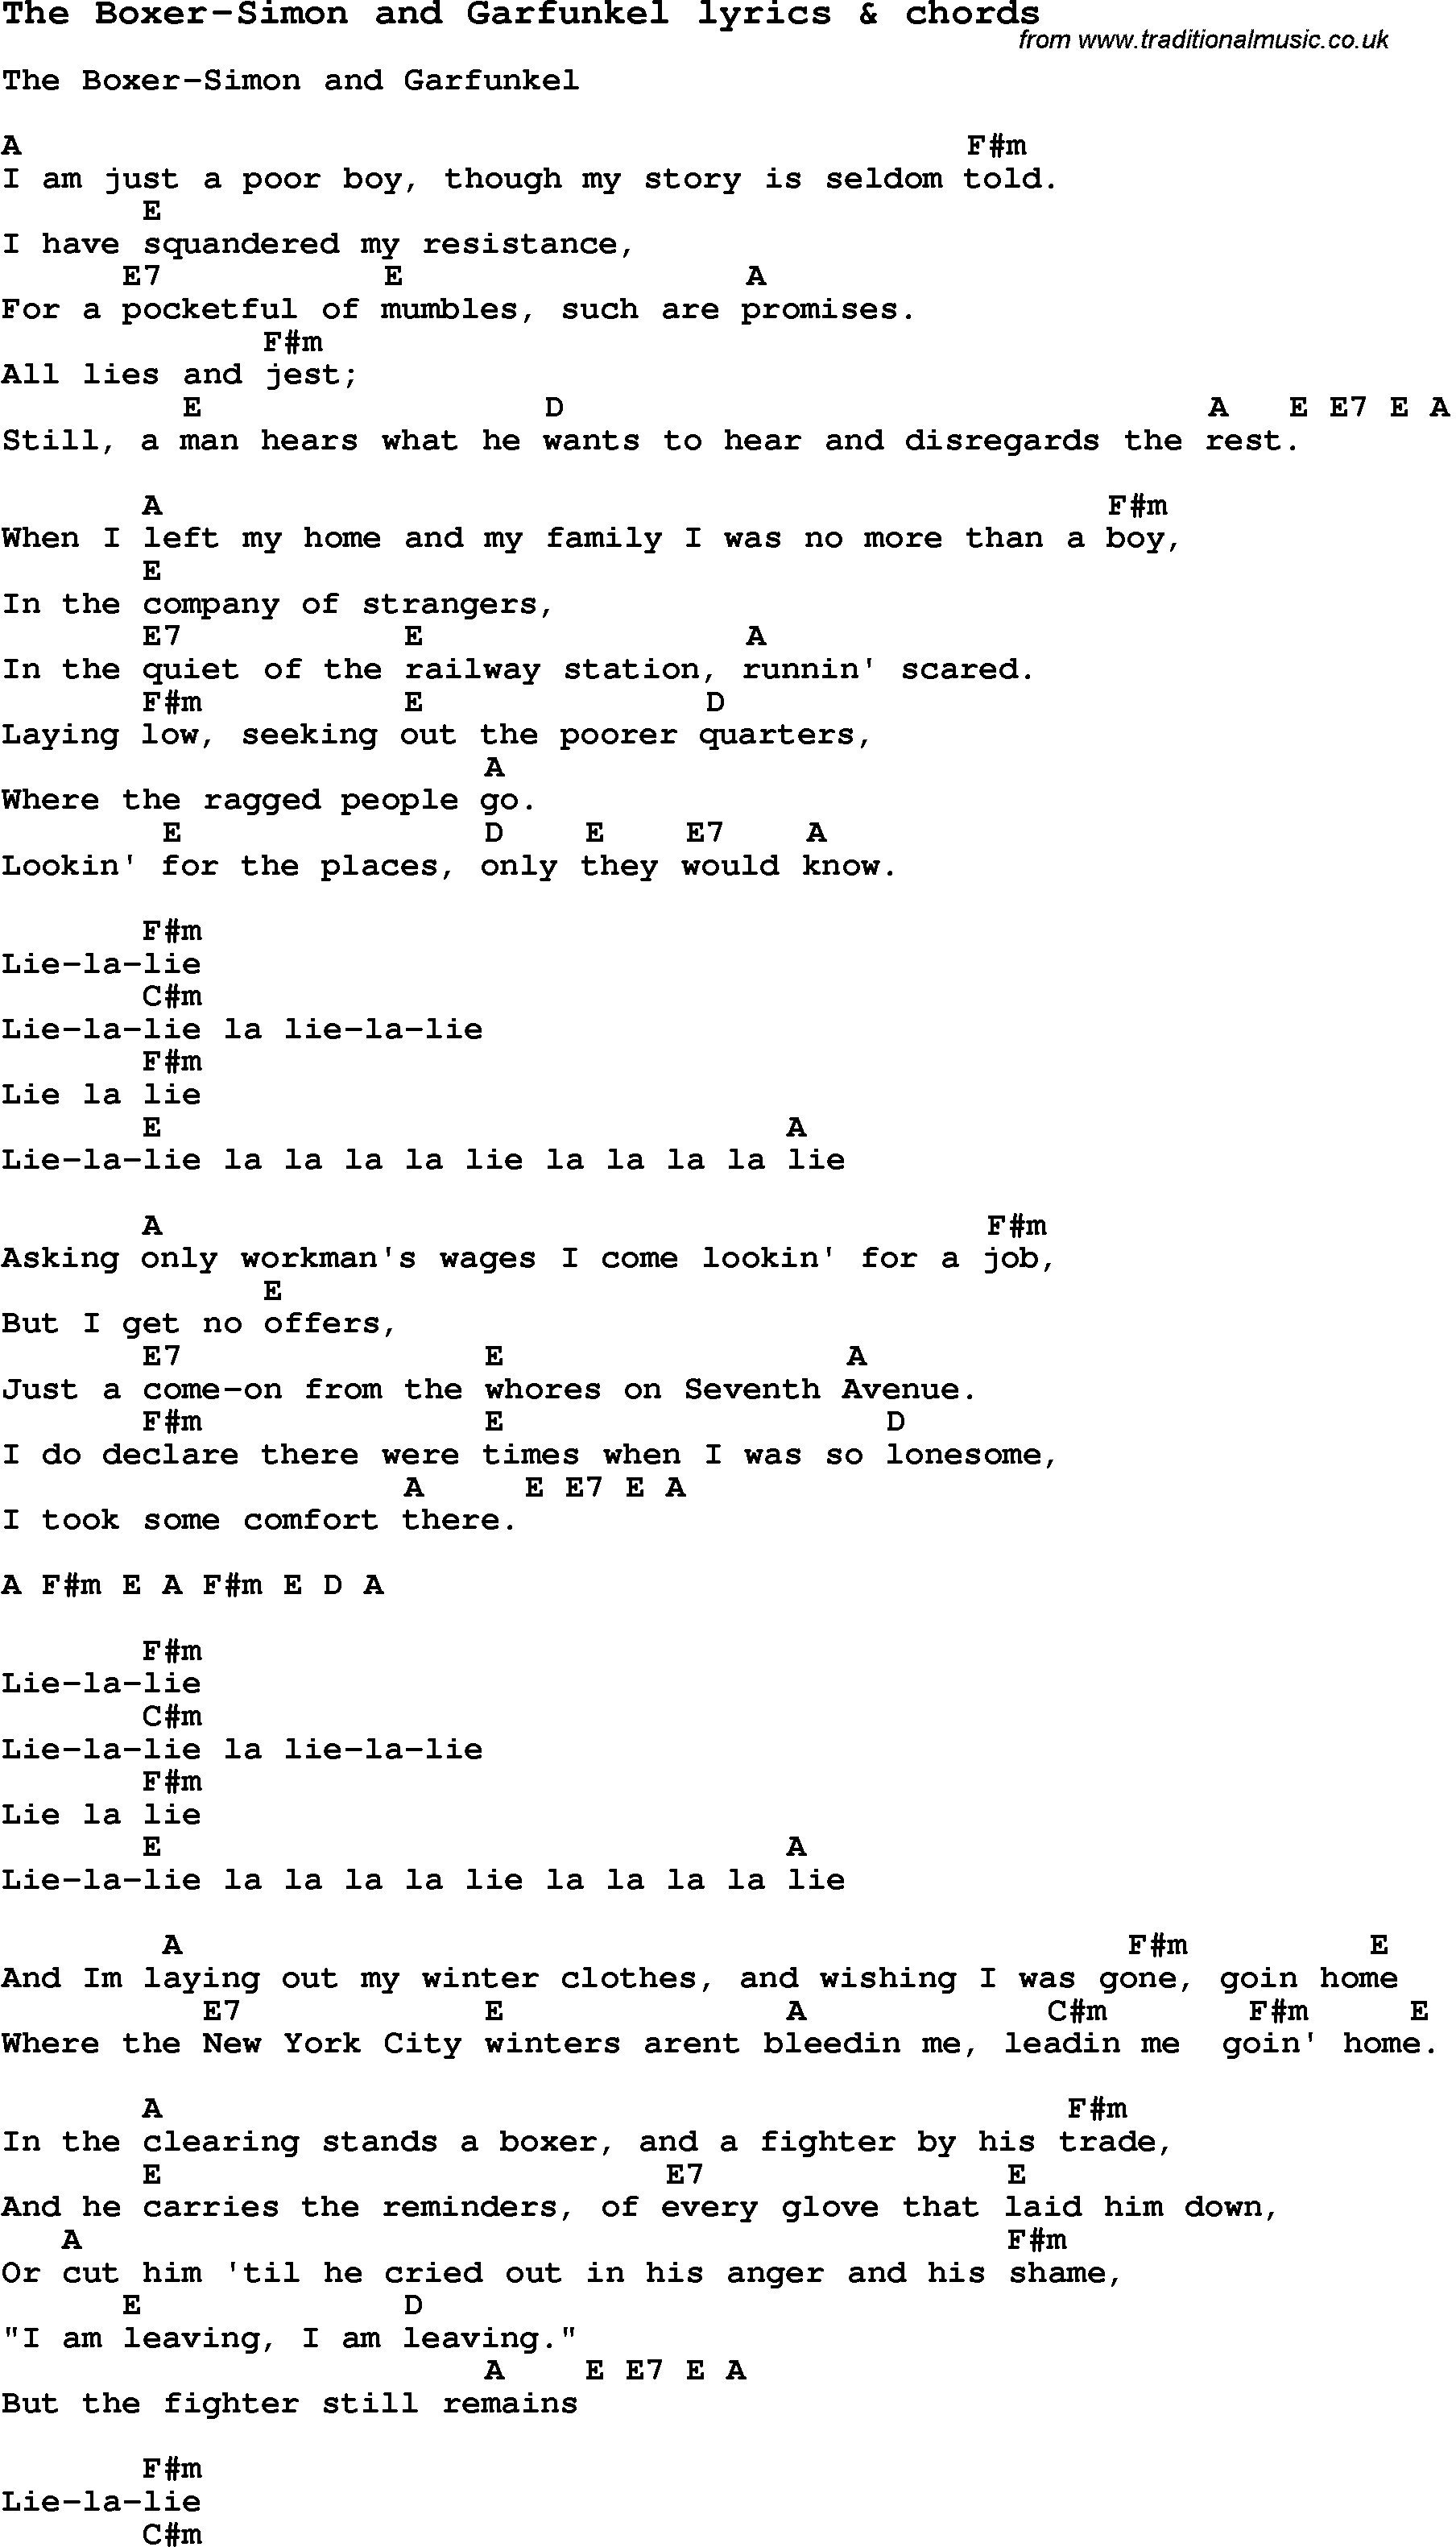 The Boxer Chords Love Song Lyrics Forthe Boxer Simon And Garfunkel With Chords